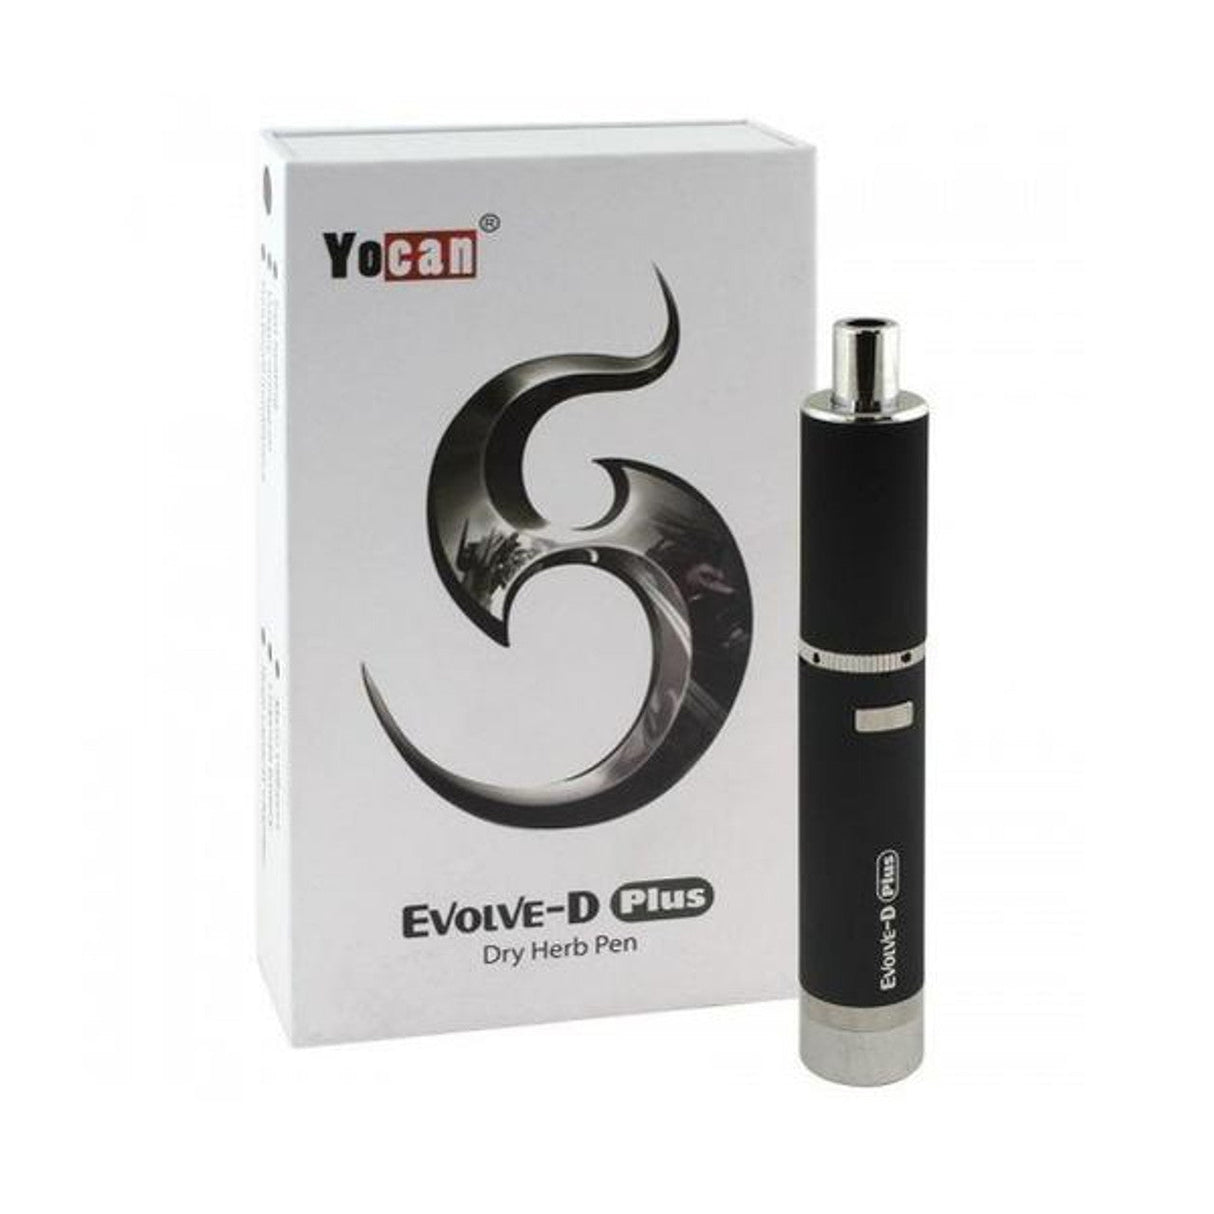 Yocan Evolve-D Plus Dry Herb Vaporizer in Black with 1100mAh Battery - Front View with Box